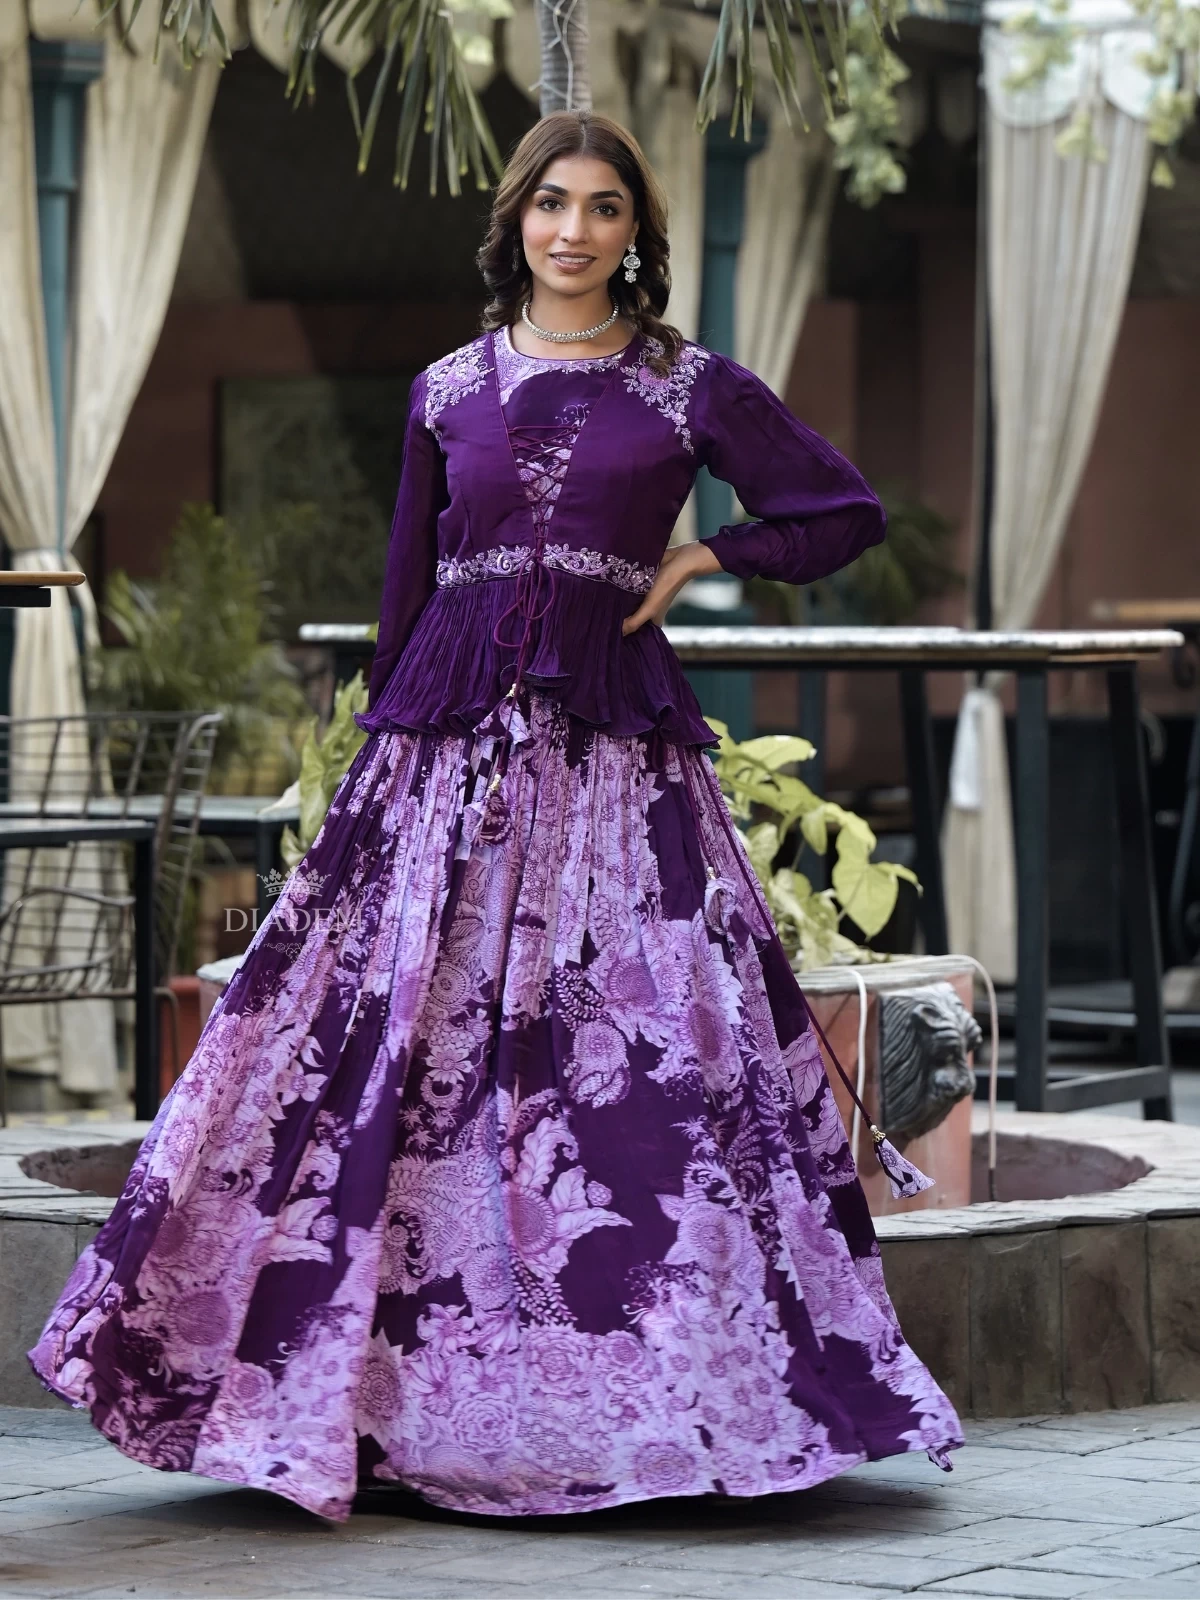 Purple Georgette Indo-Western Lehenga Embellished with Floral Prints and Sequins, Paired with Overcoat